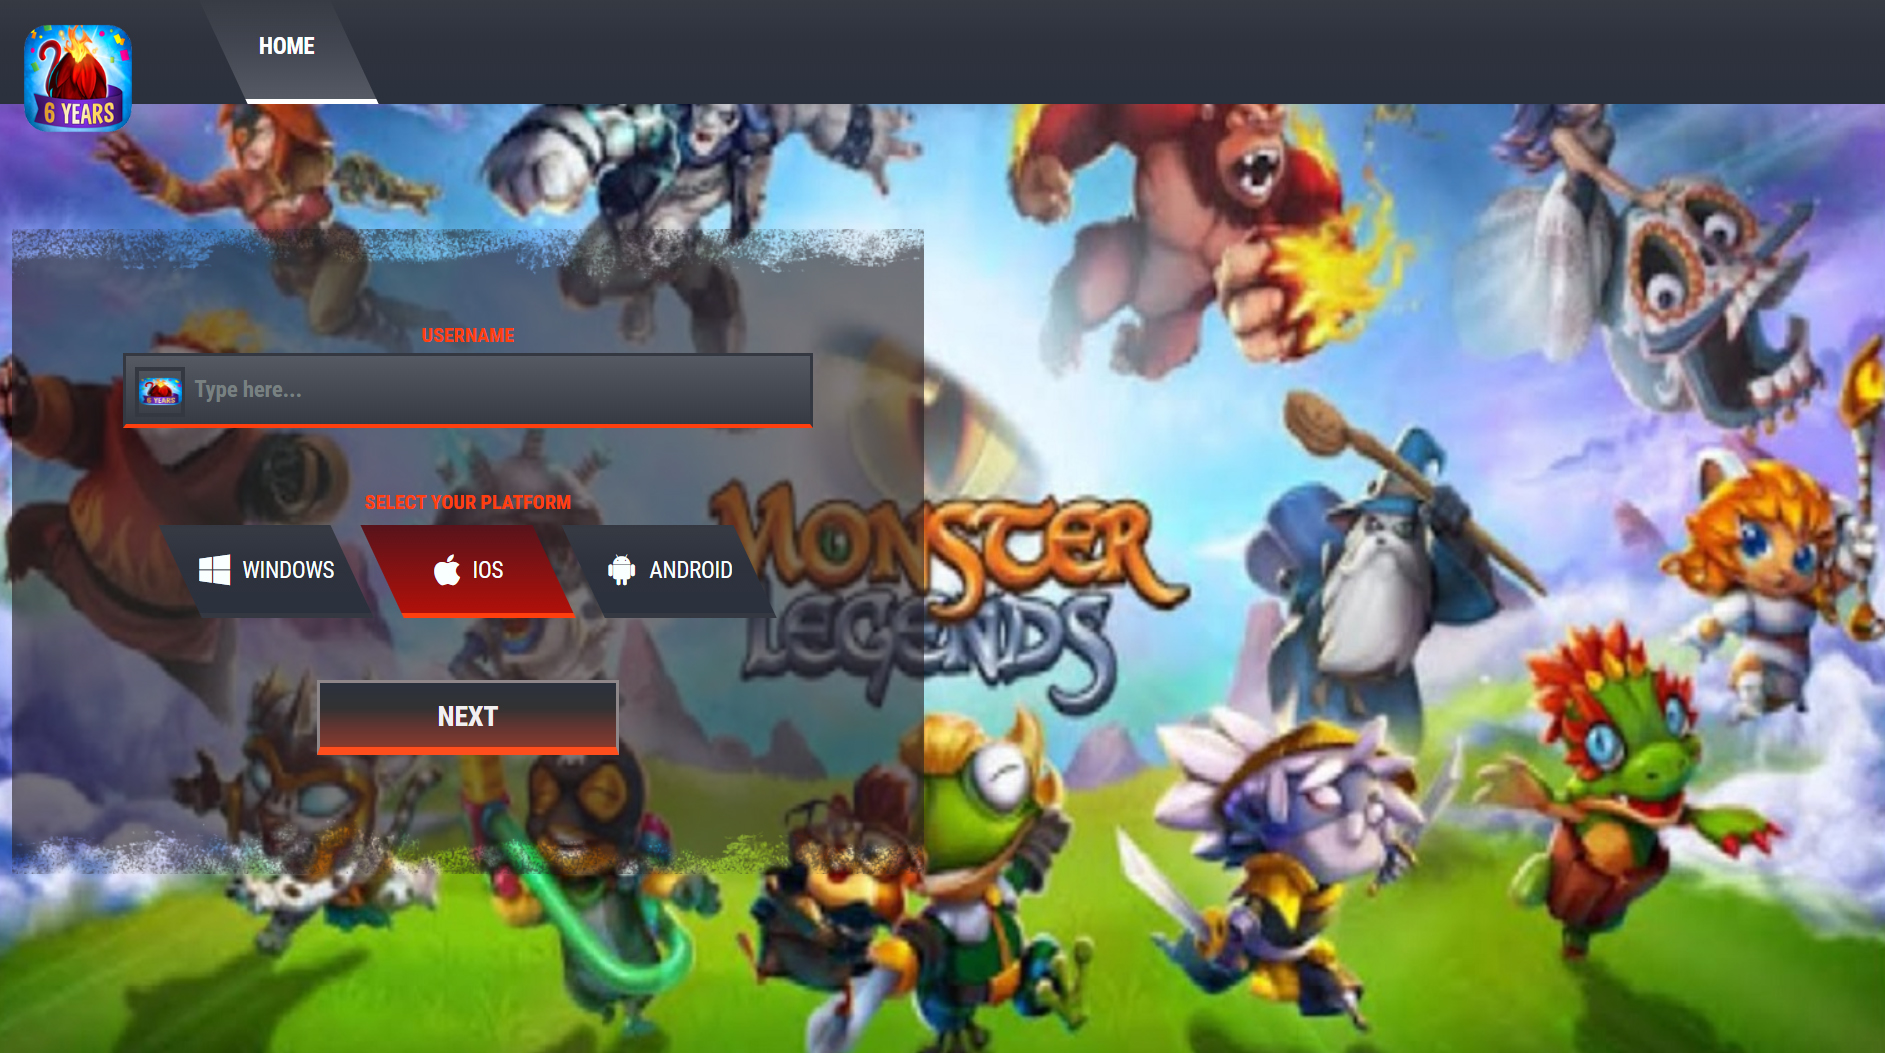 how to get a hack version of monster legends